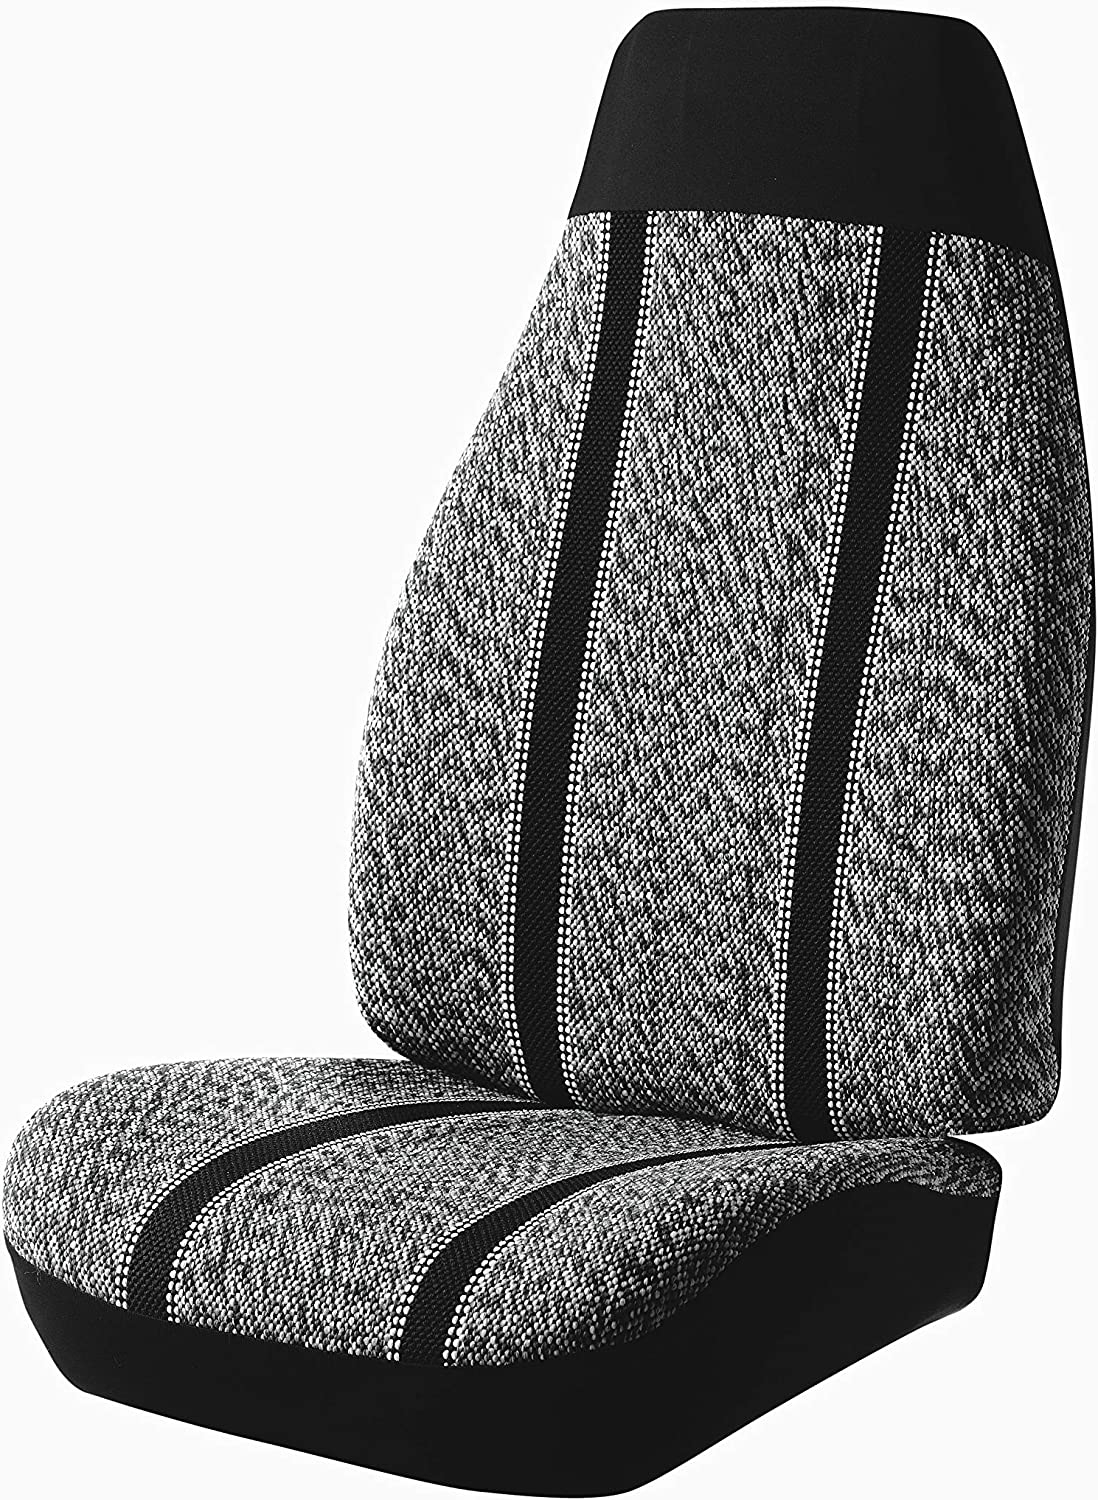 Fia Tr40 Series, Wrangler Saddleblanket Custom Fit Front Seat Cover, Gray, With Super Grip